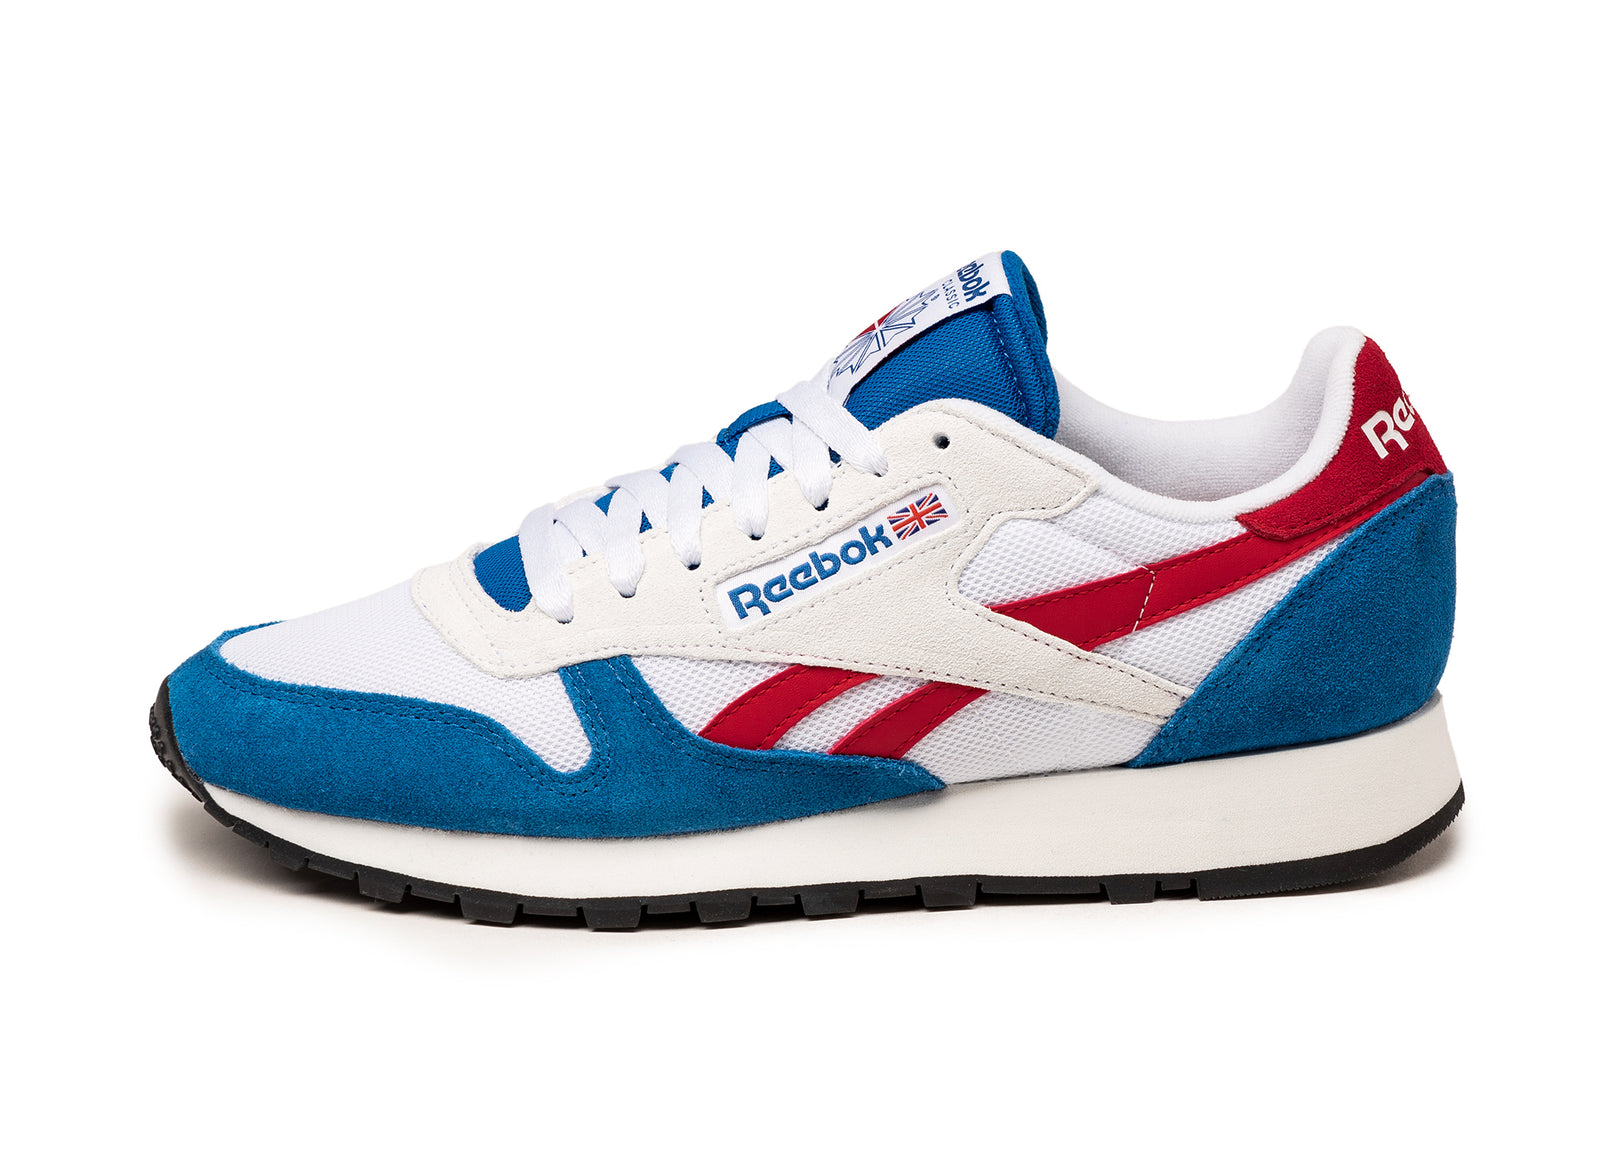 Reebok Classic Leather
Blue / White Red